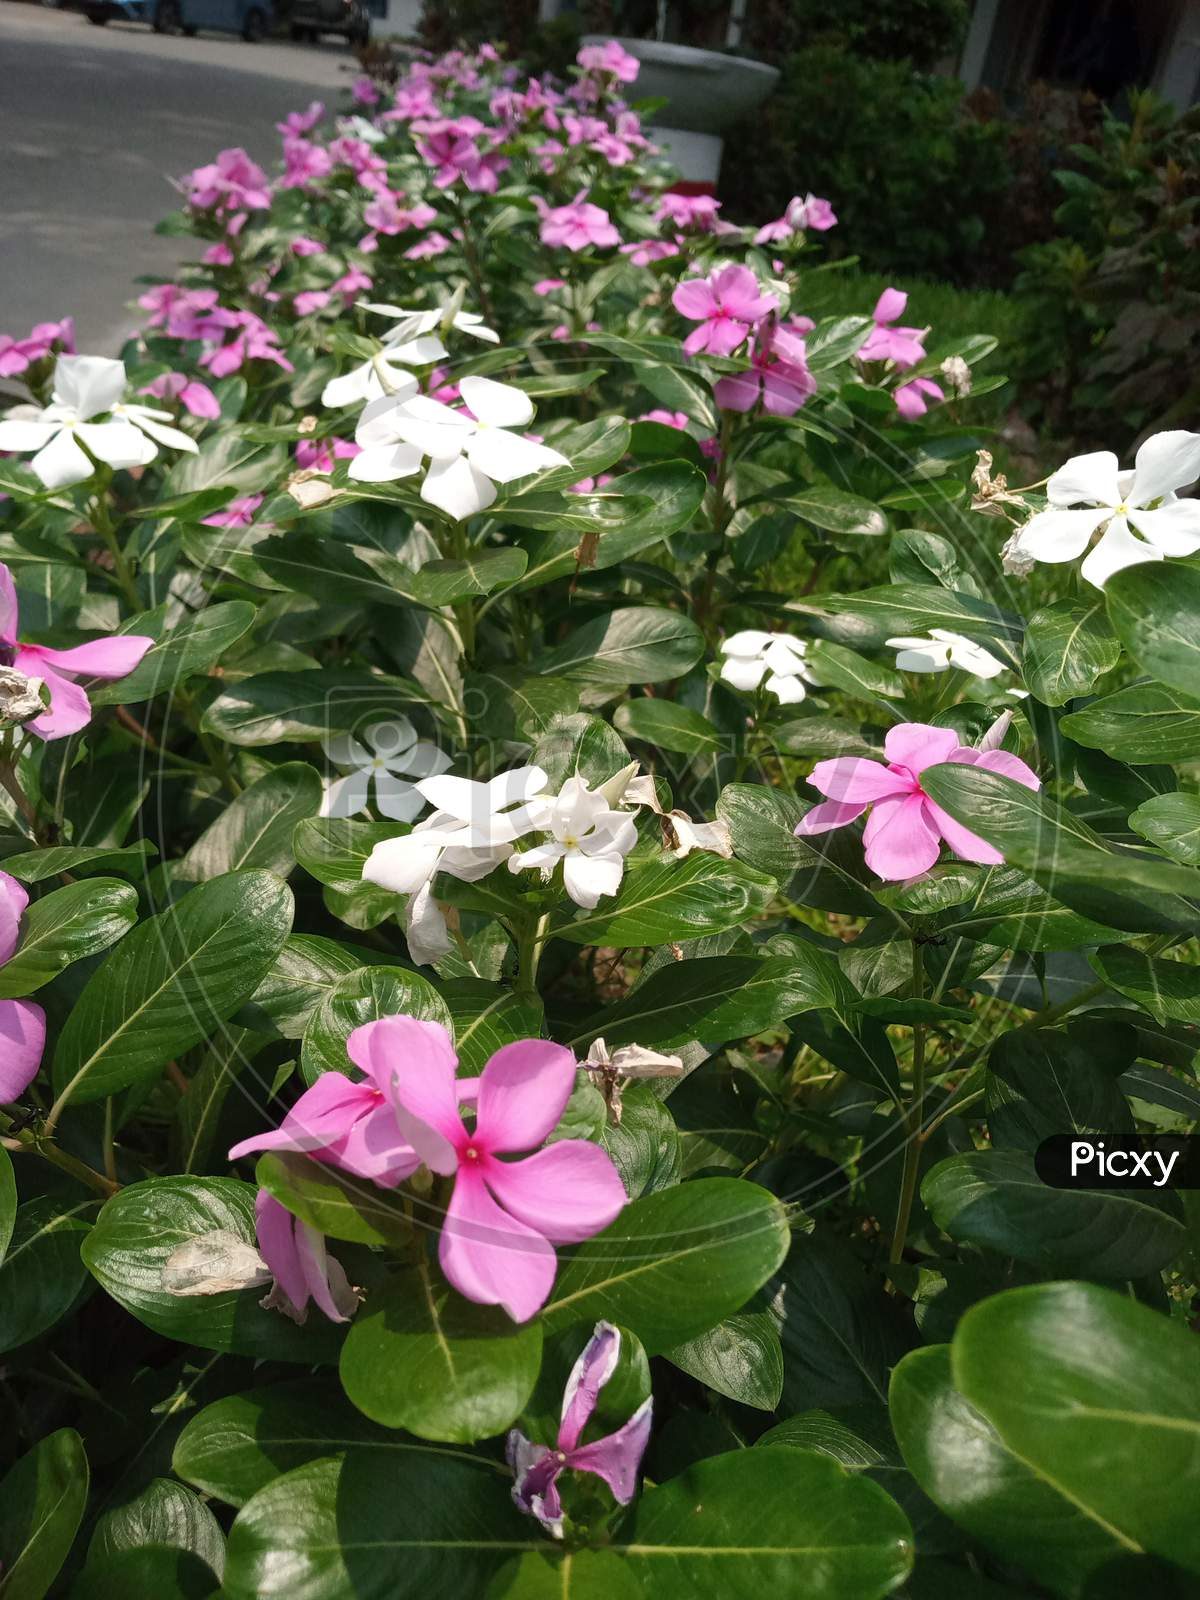 A garden of pink and white periwinkle